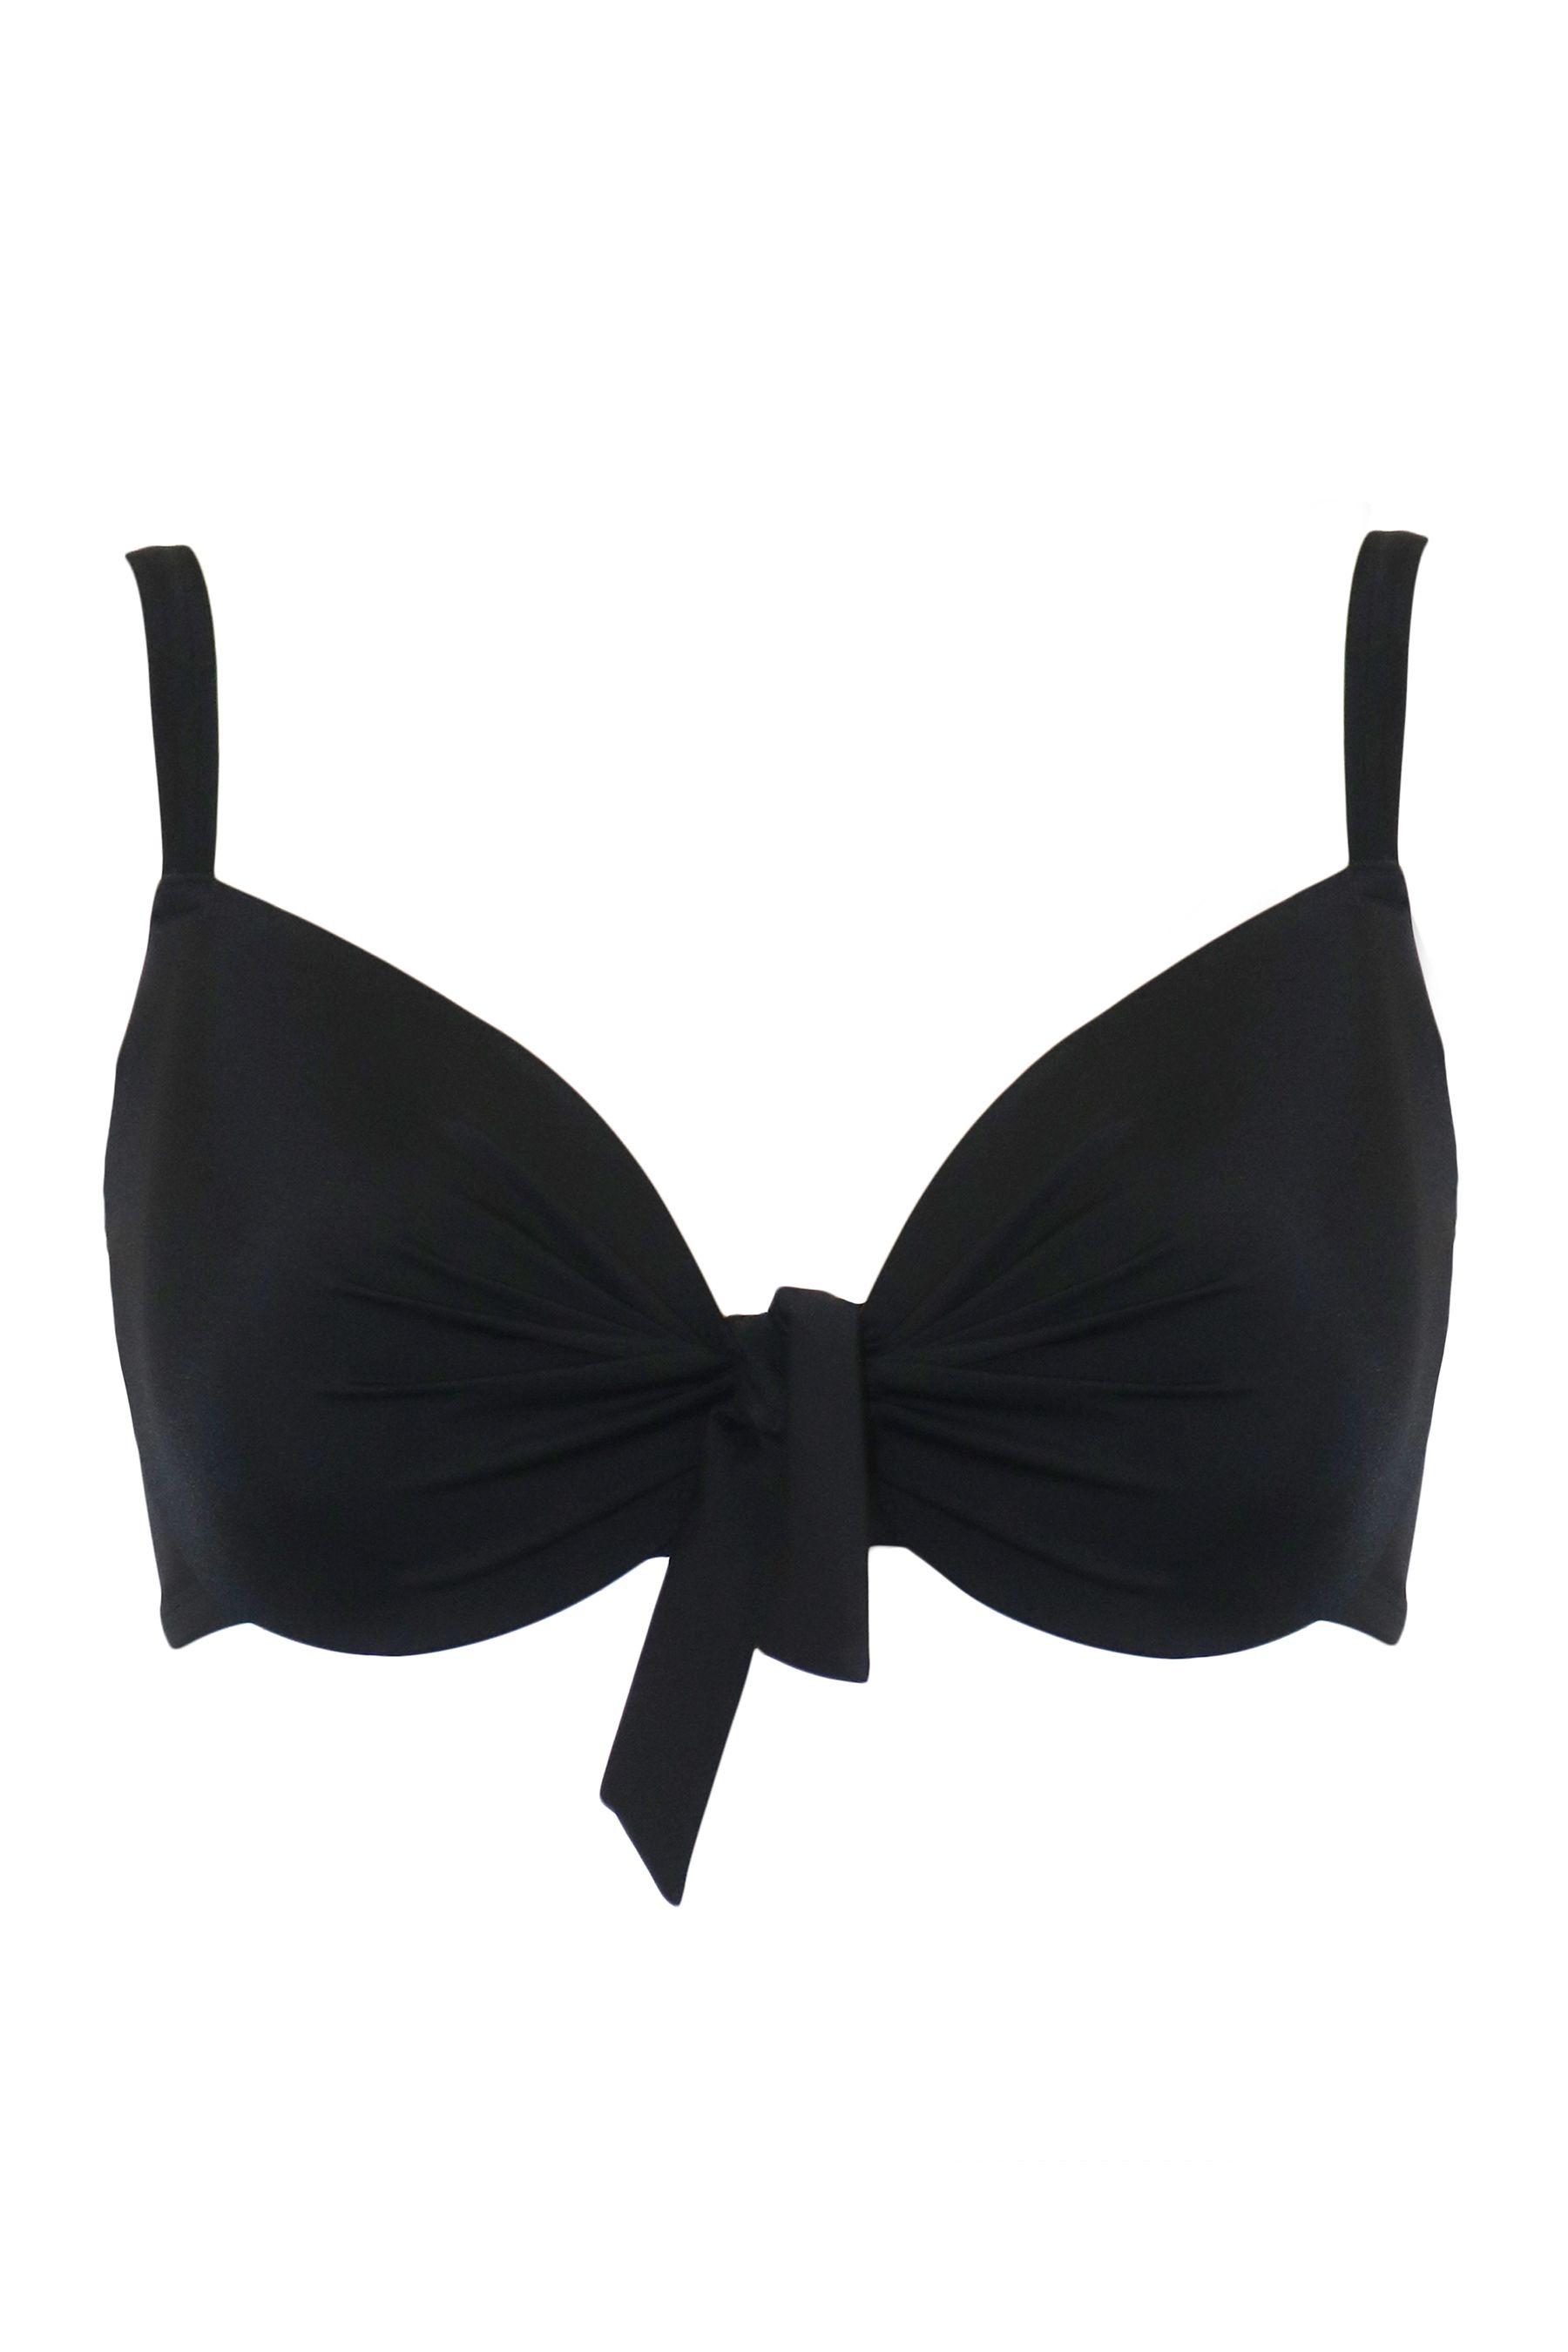 Buy Pour Moi Black Padded Madrid Bikini Top from the Next UK online shop